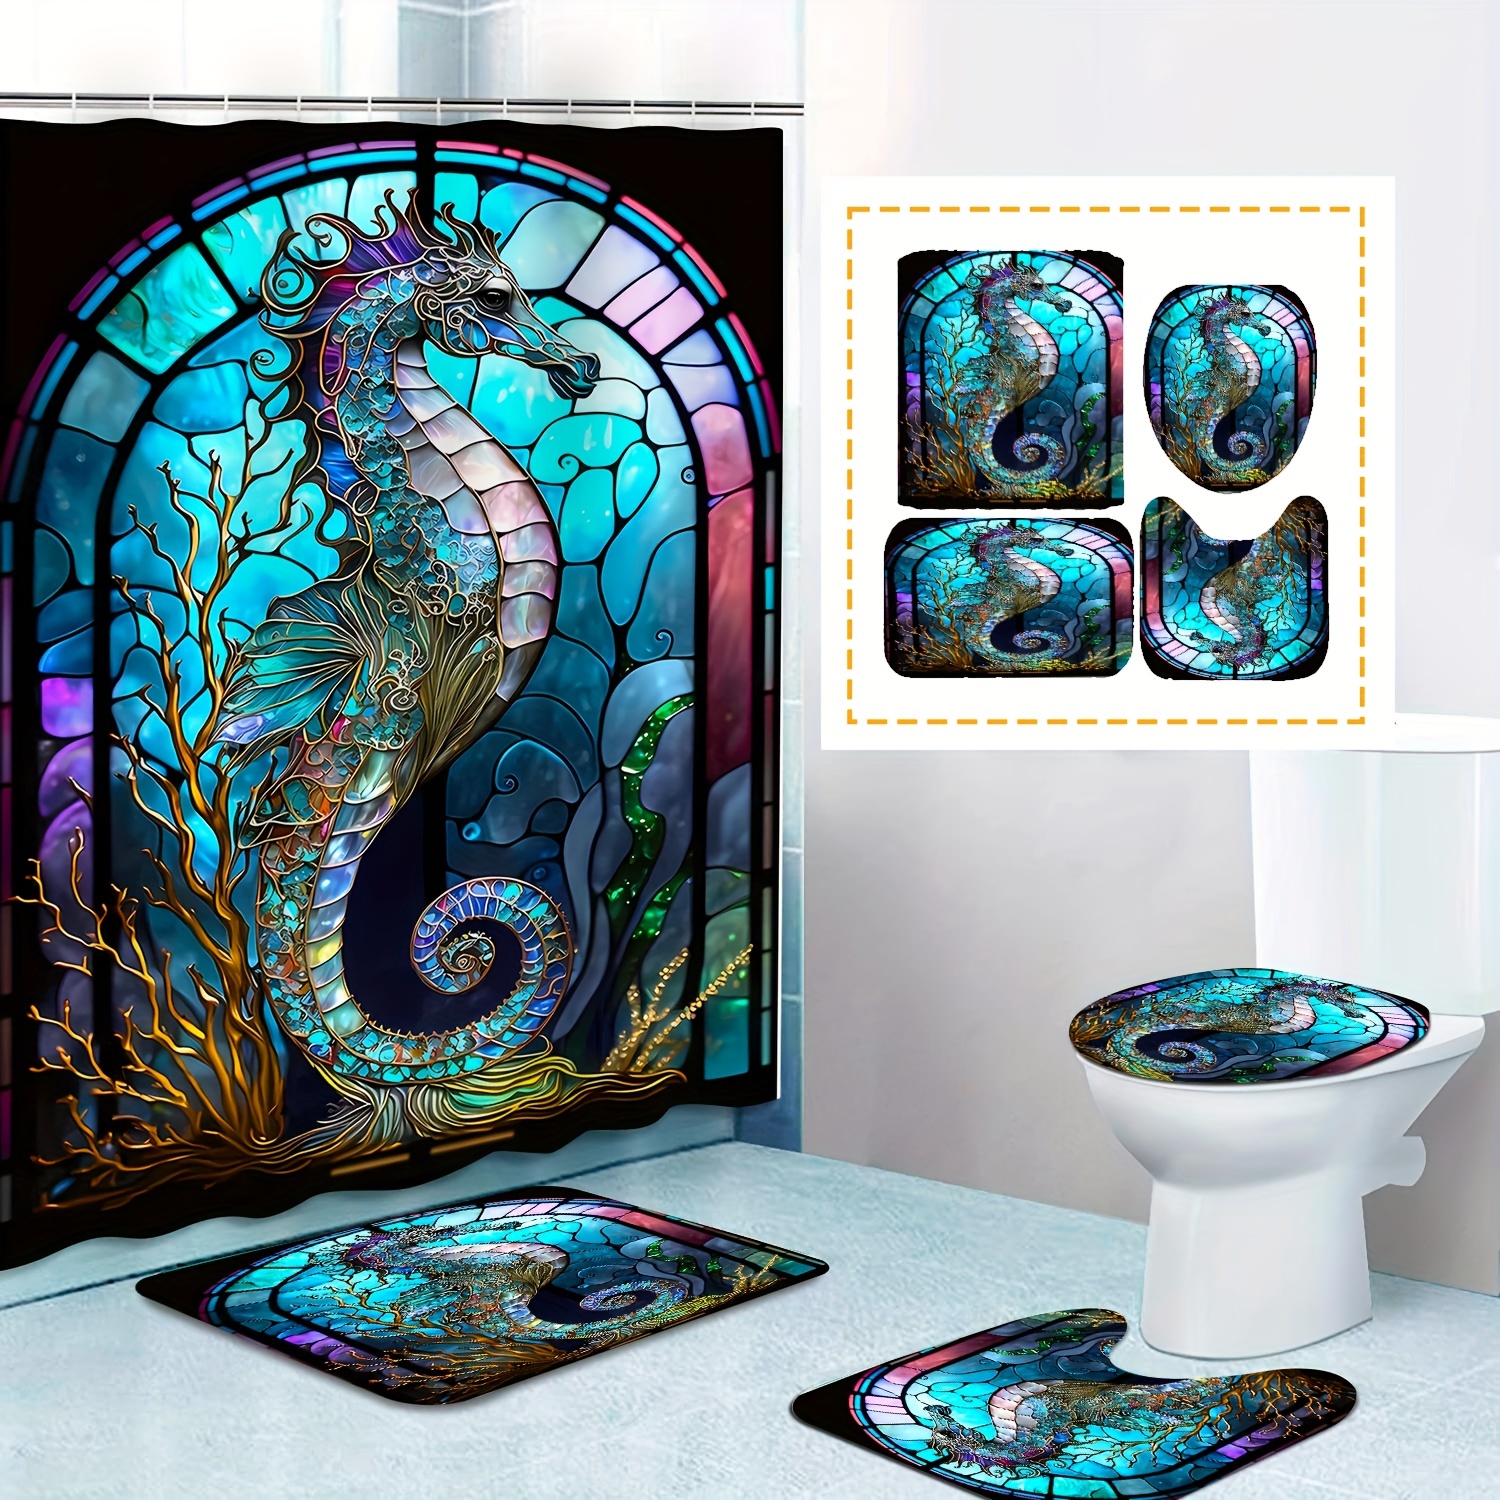 Waterproof Bath Shower Curtain With Stained Glass Mermaid in White